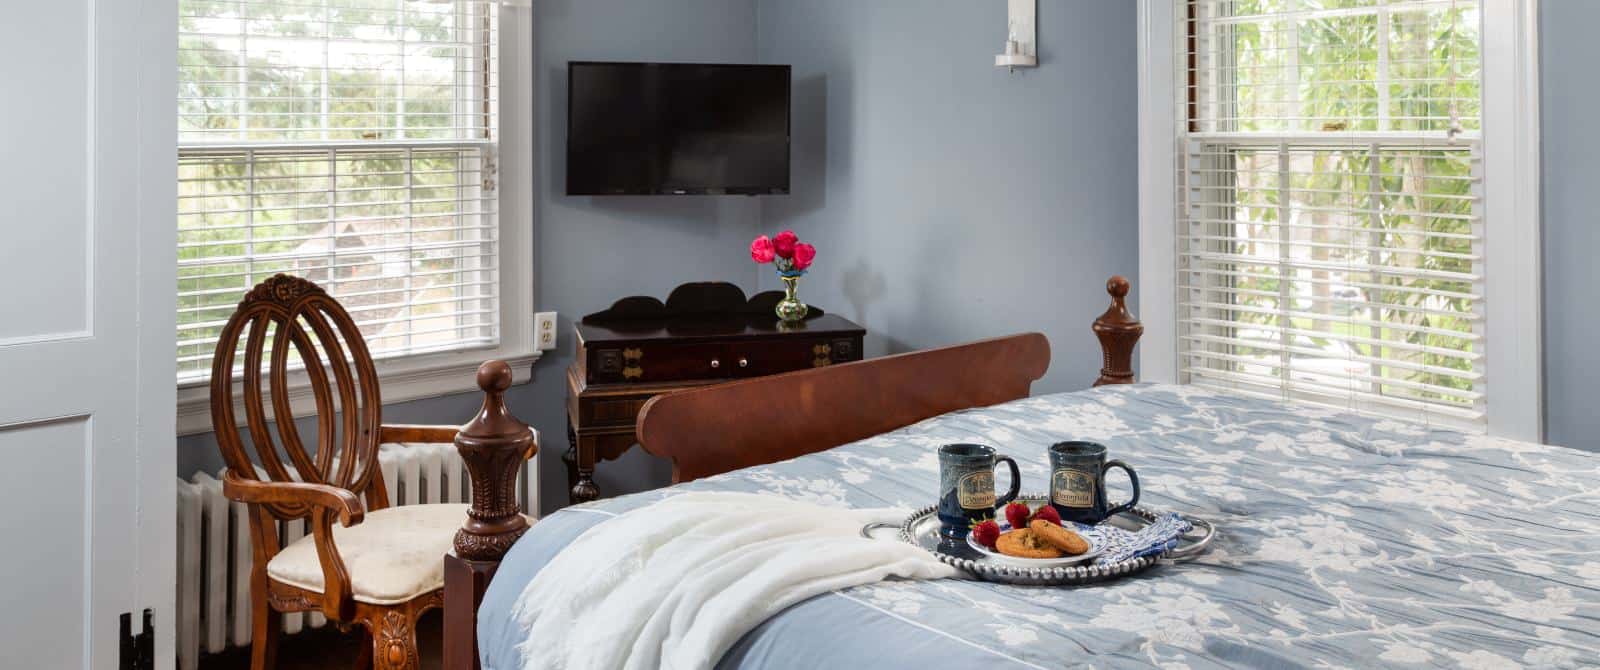 Bedroom with blue walls, white trim, blue bedding, wall-mounted flat-screen TV, and antique wooden chair